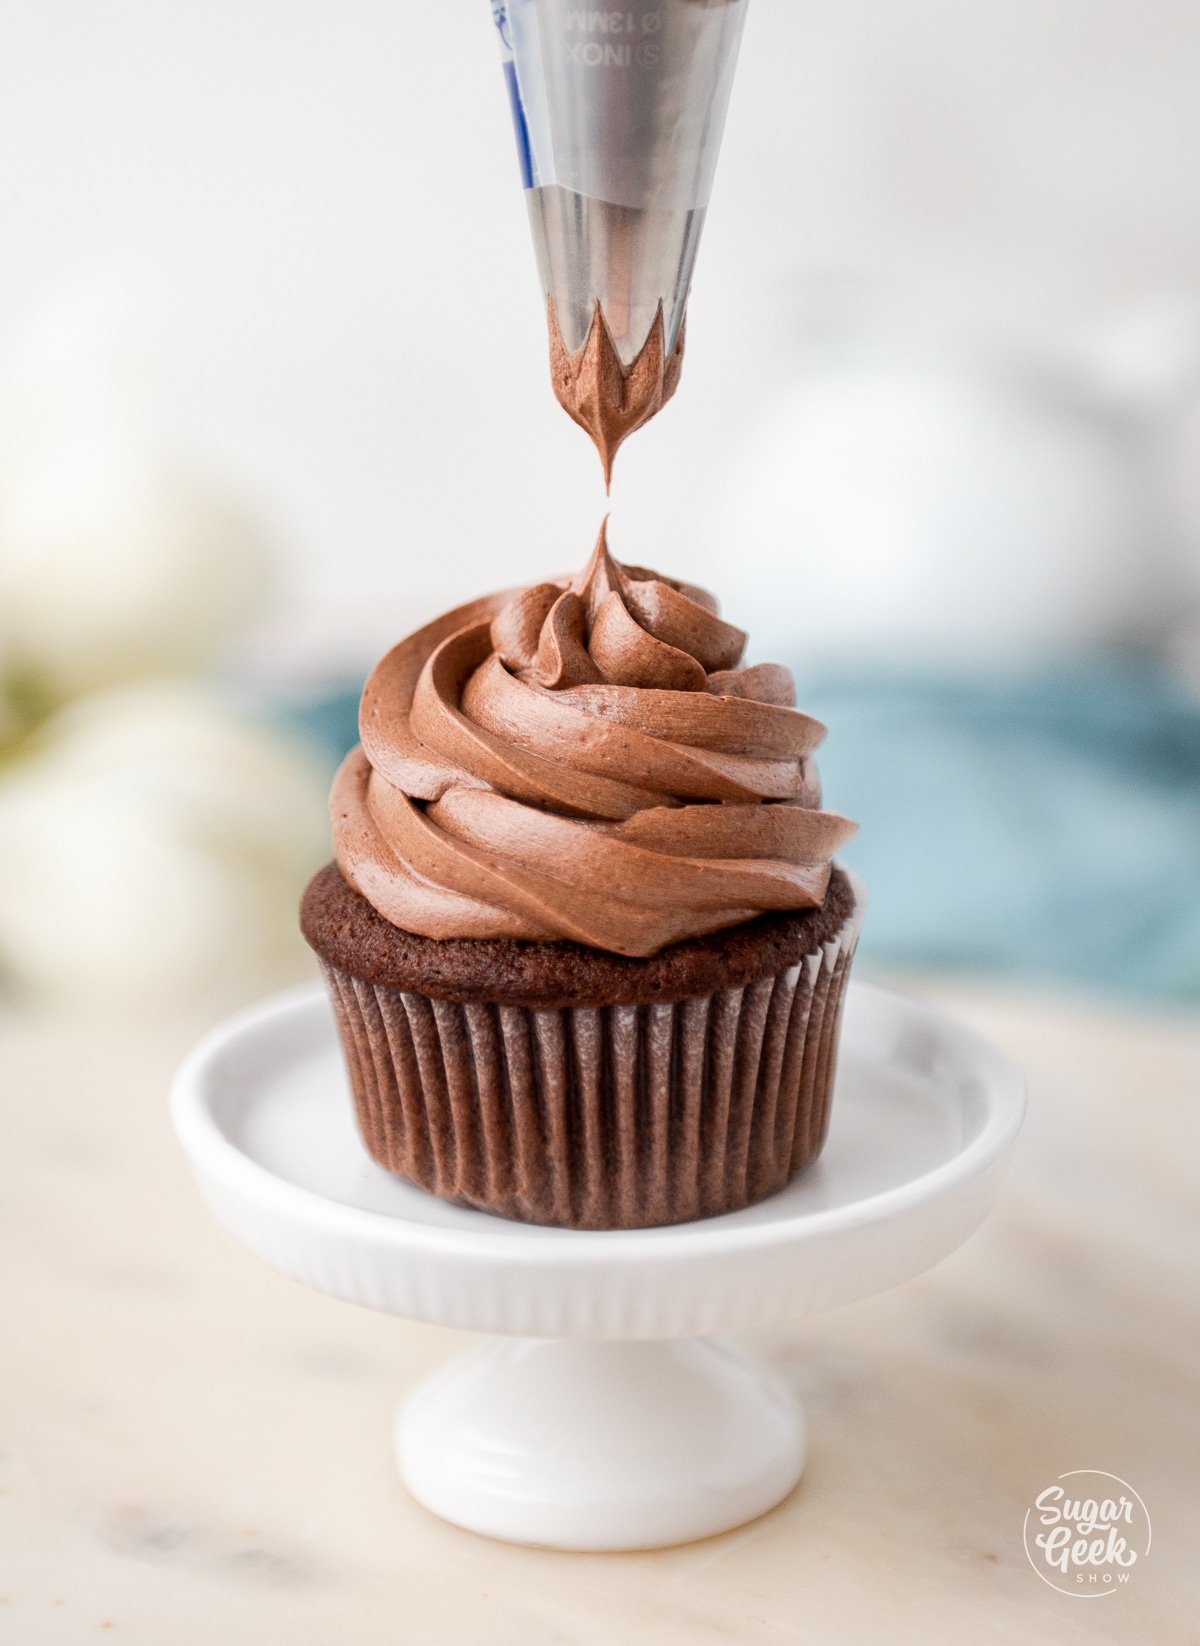 piping frosting onto a chocolate cupcake.